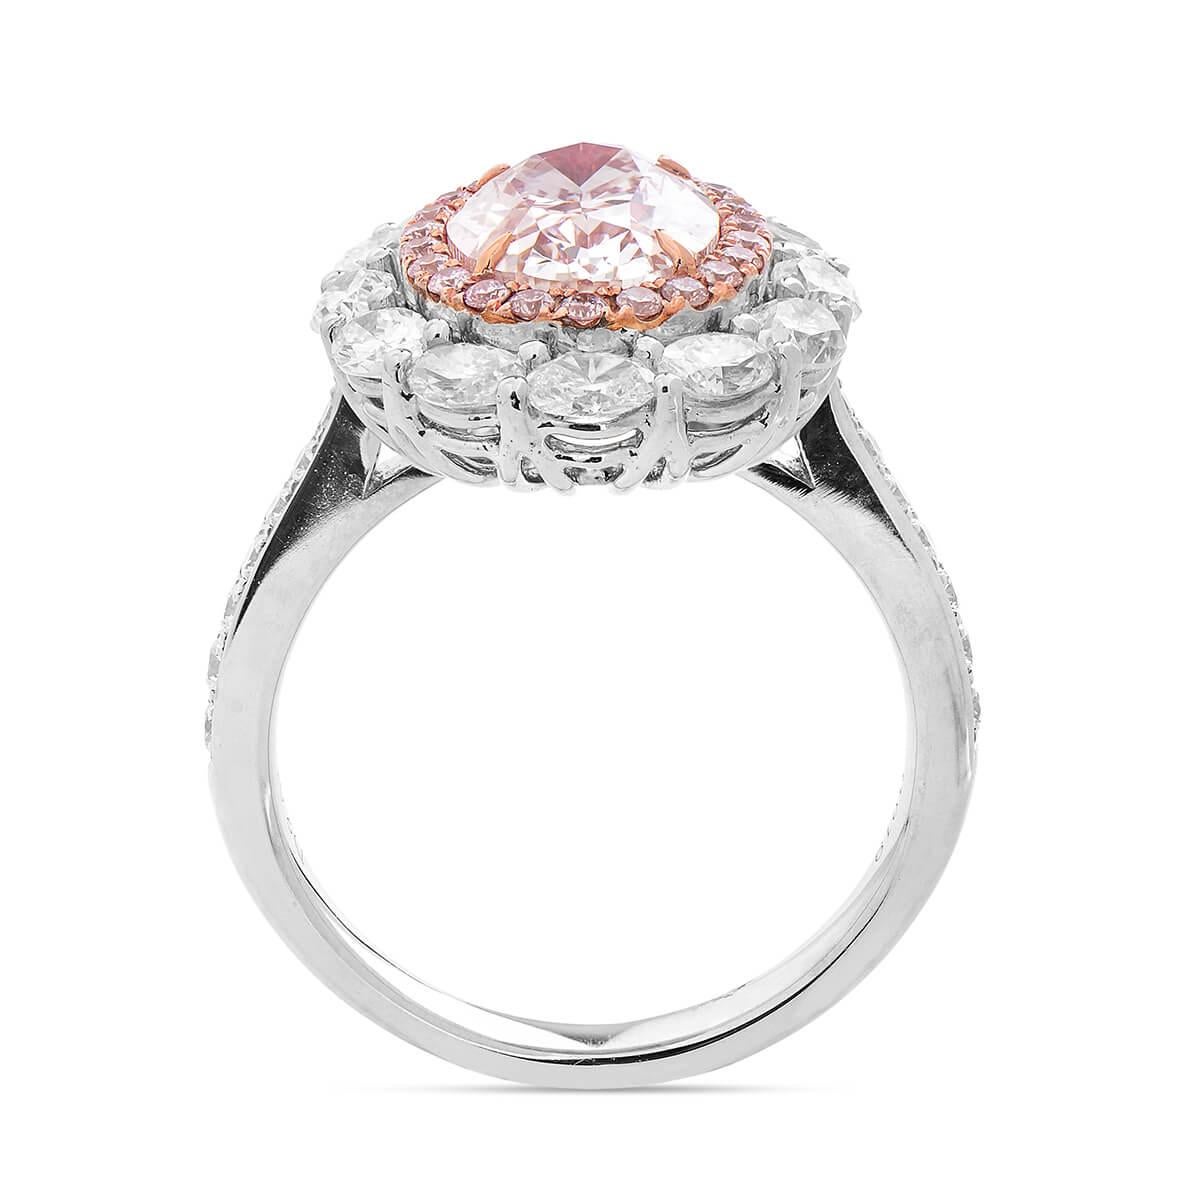 This one of a kind piece hosts one 2.01 Carat Light Pink Diamond and is set in a double halo of natural pink and white diamonds, together making up 3.50 Carats. This piece was expertly crafted using 18 Karat White Gold. GIA certified. 
Natural pink